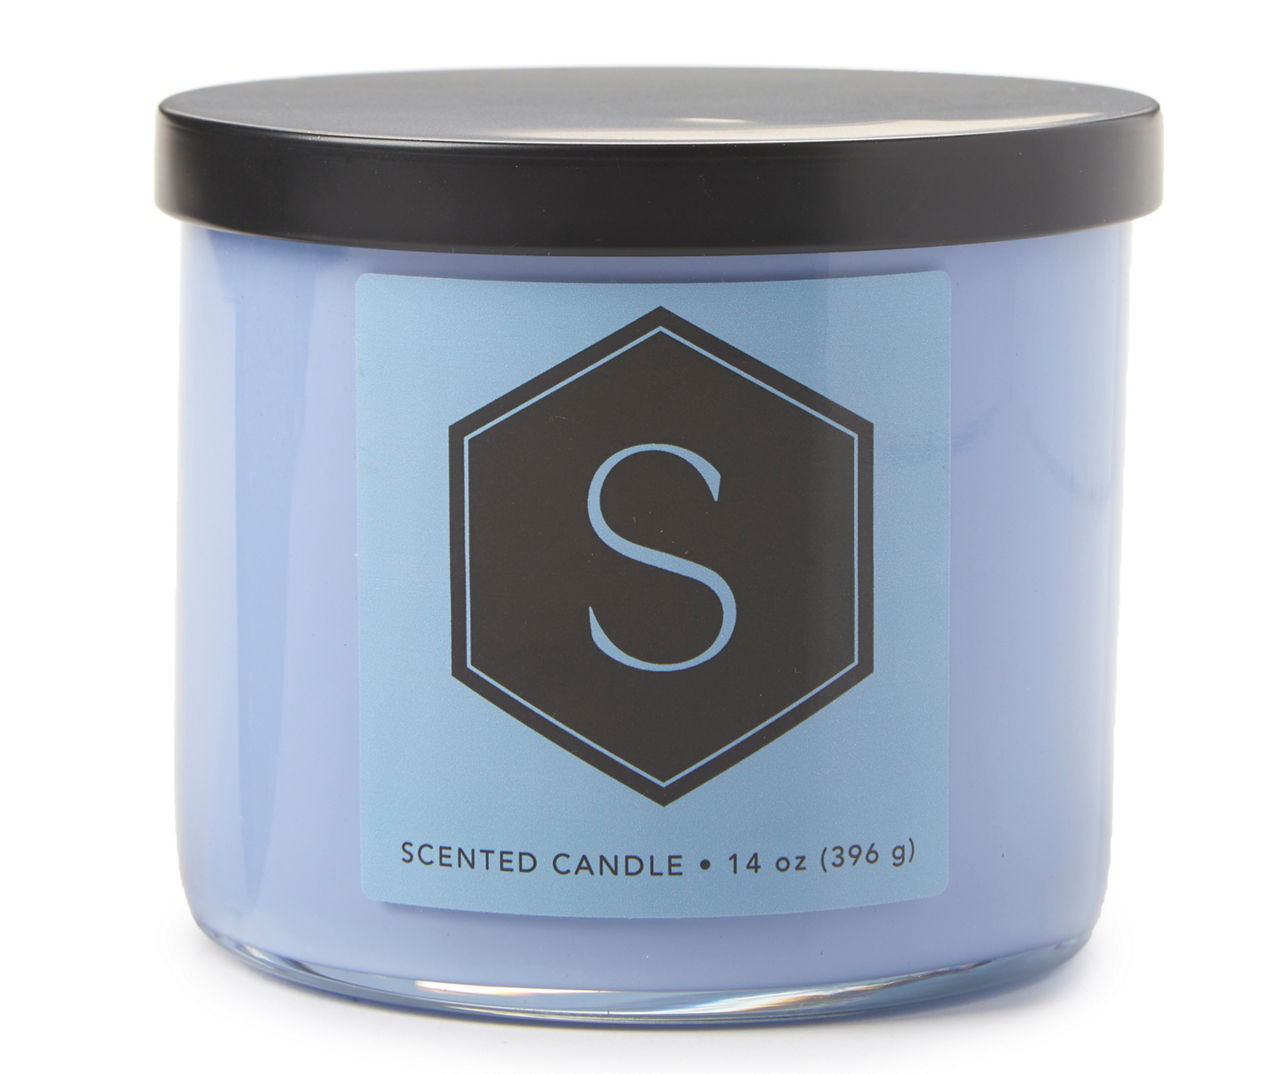 Bamboo Forest "S" Blue 3-Wick Jar Candle, 12 oz.